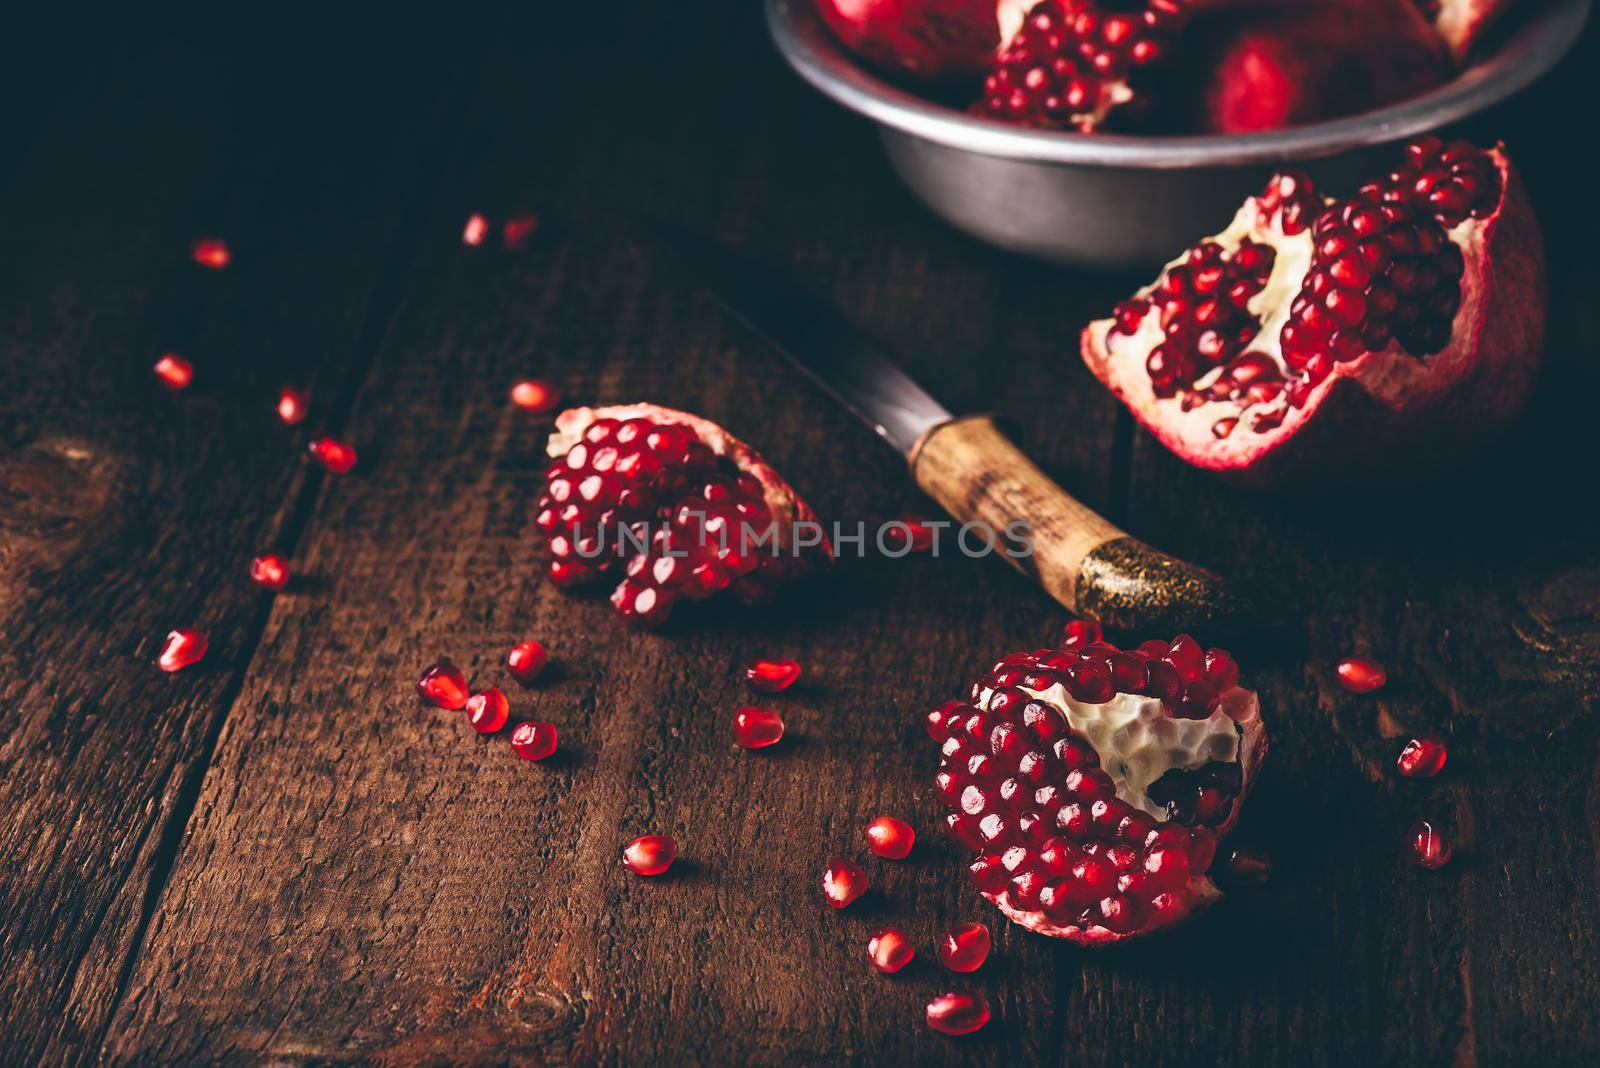 Pomegranate pieces on rustic wooden surface by Seva_blsv